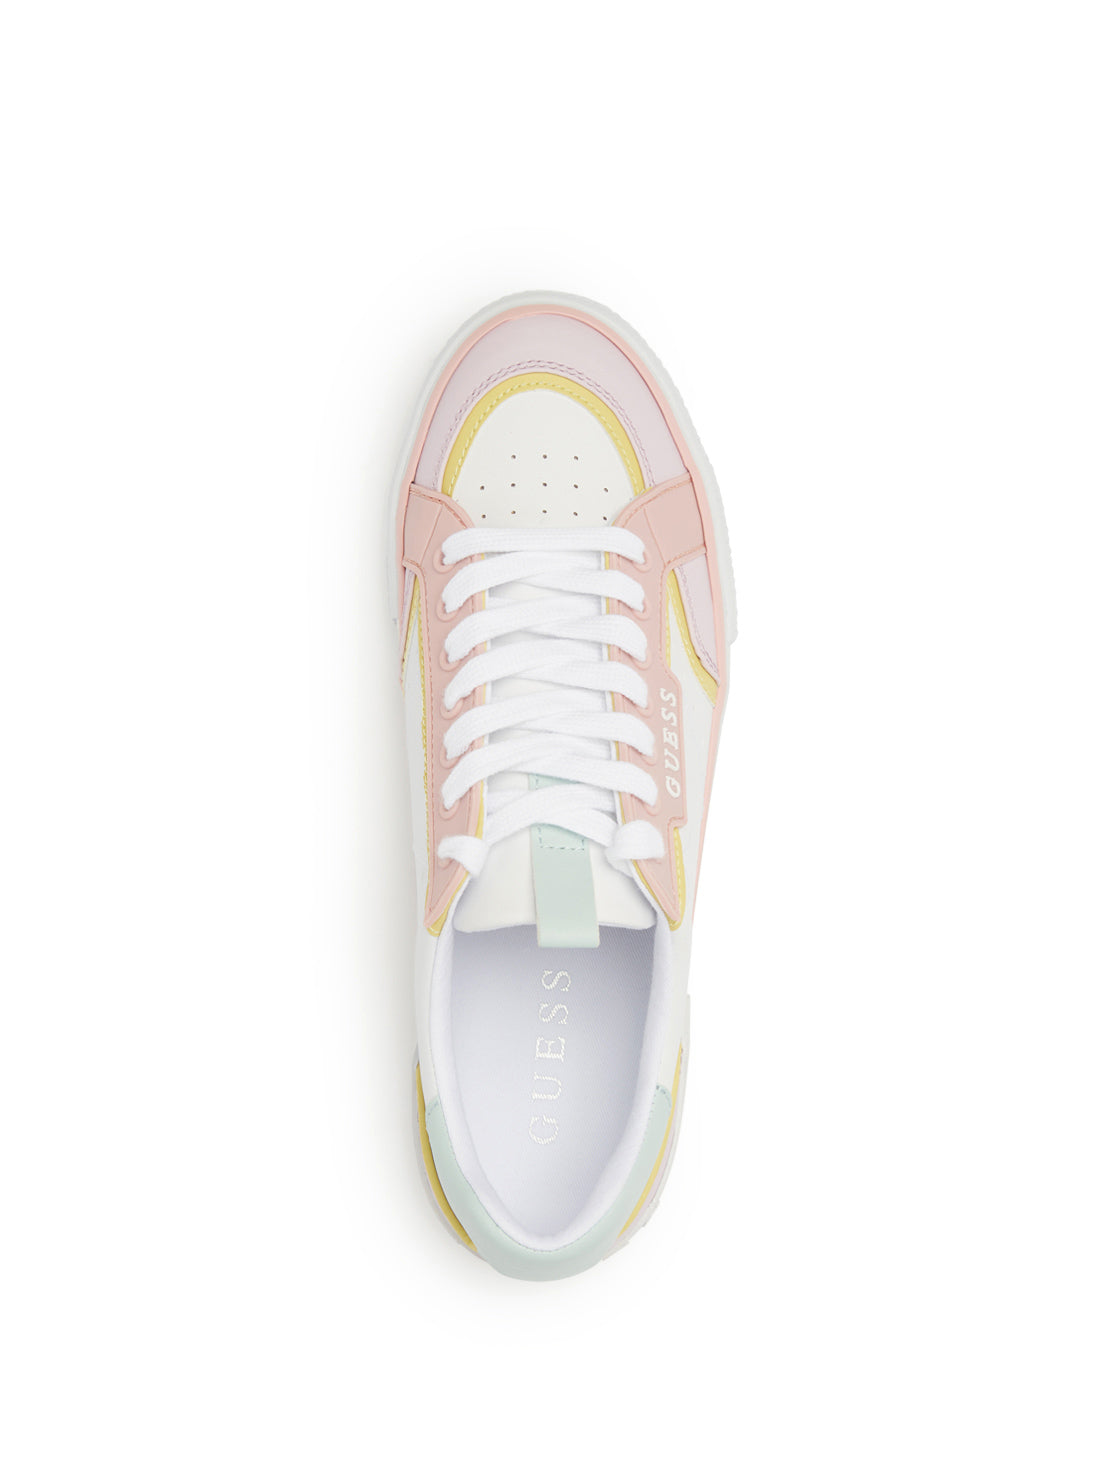 GUESS Women's White Pink Lollin Low Top Sneakers LOLLIN-A WHI04 Top View